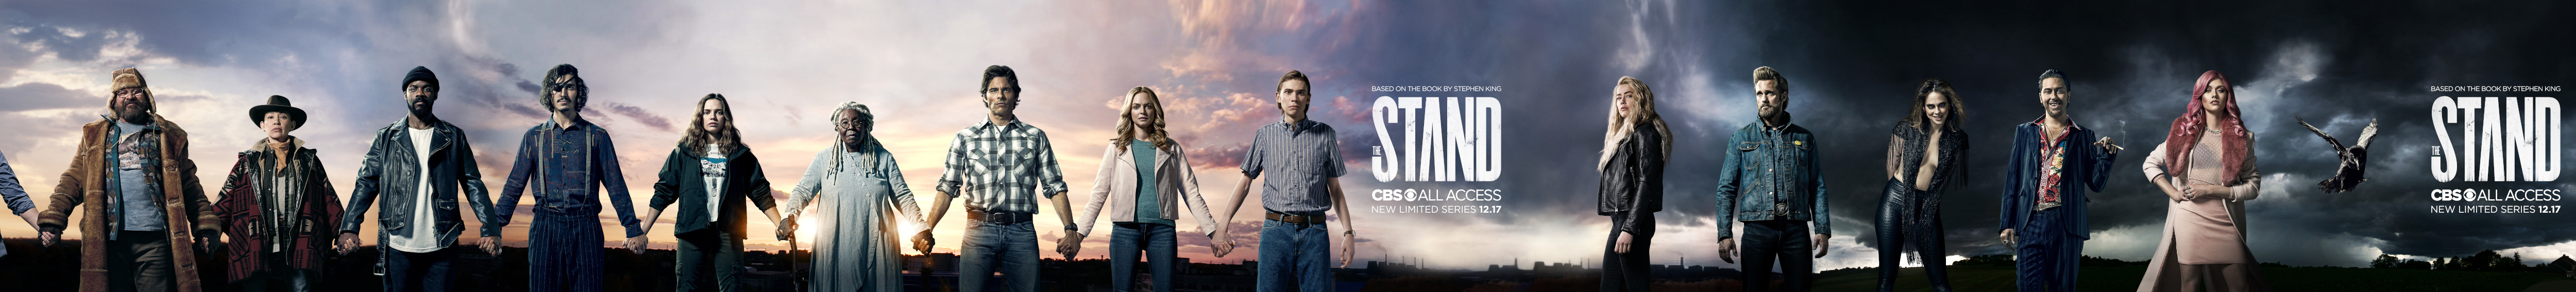 Mega Sized TV Poster Image for The Stand (#8 of 8)